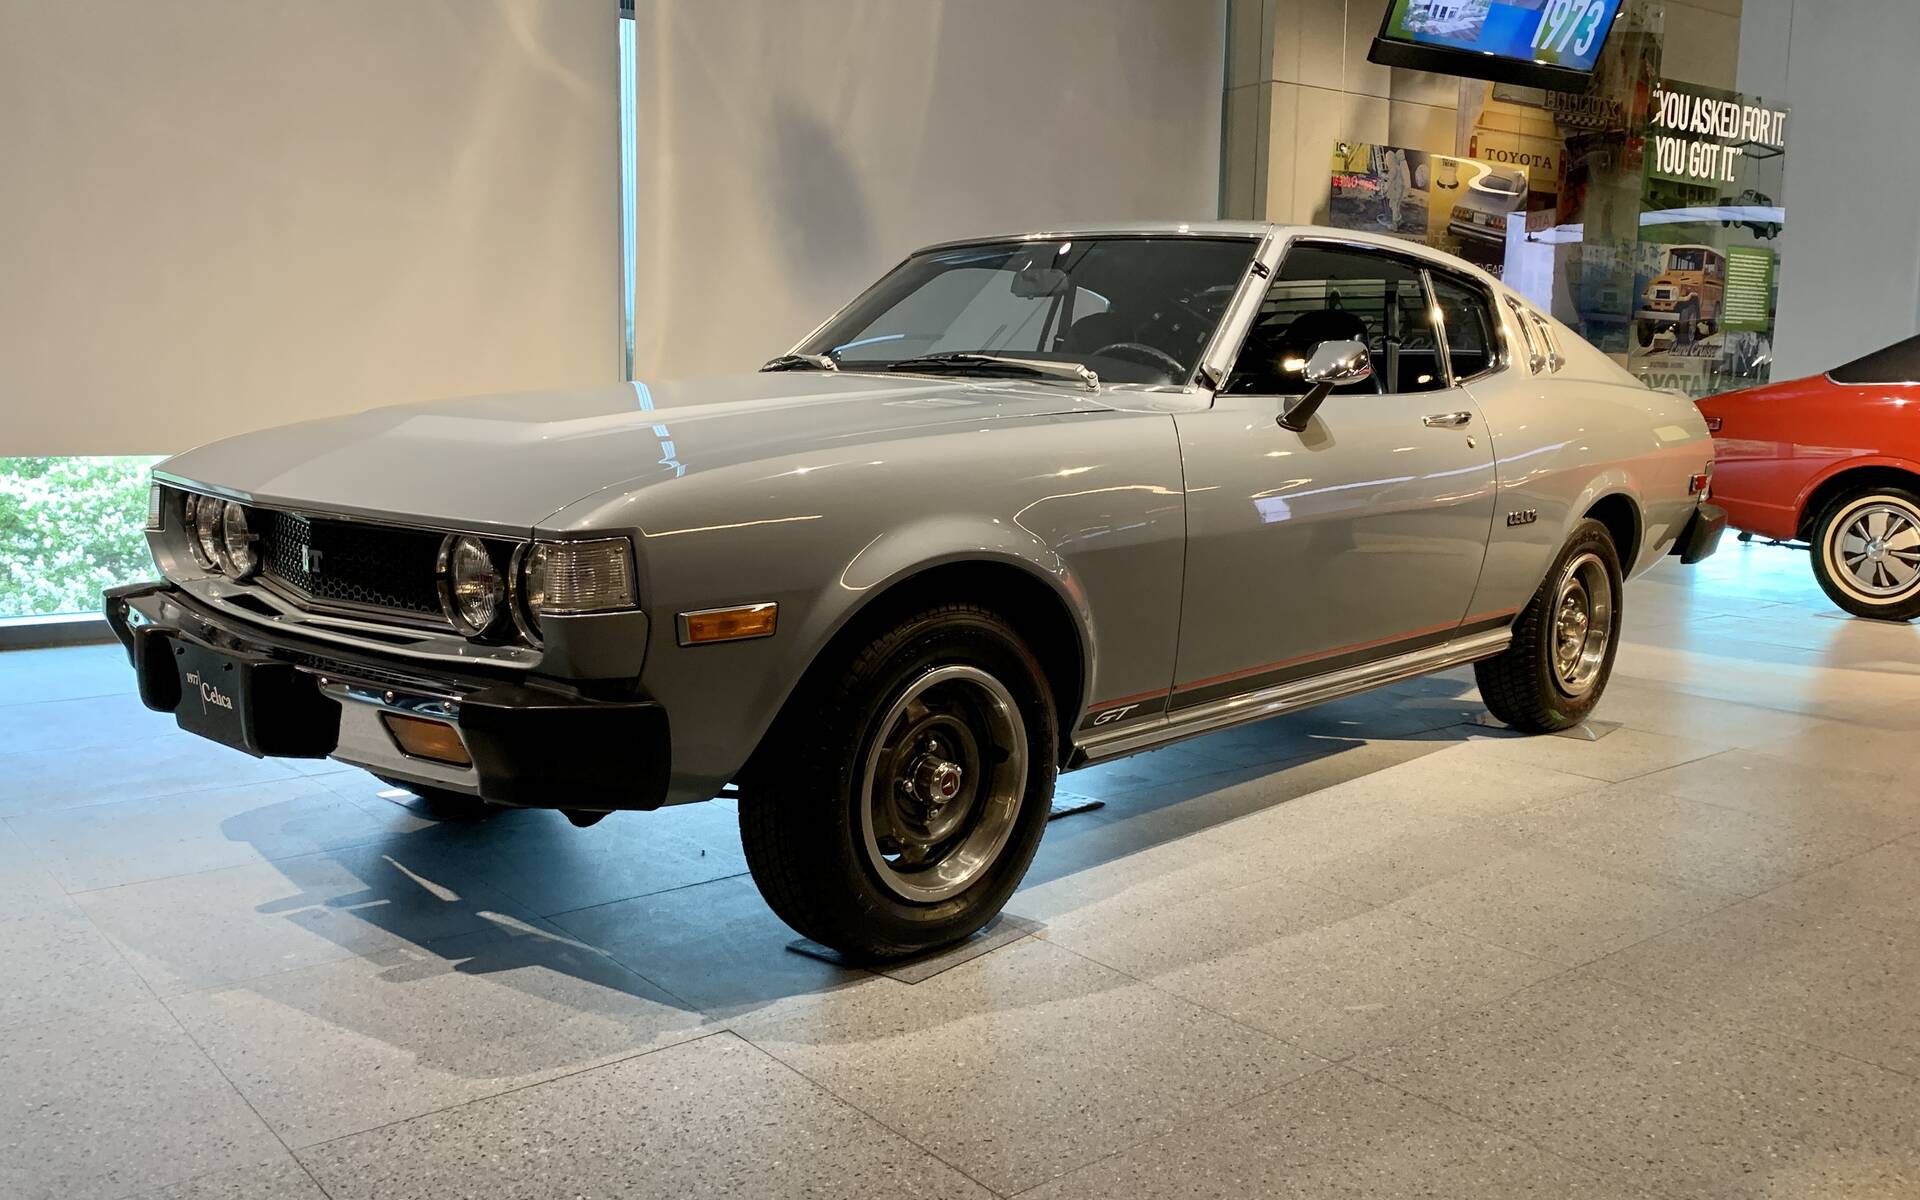 <p><strong>Toyota Celica GT 1977</strong></p>